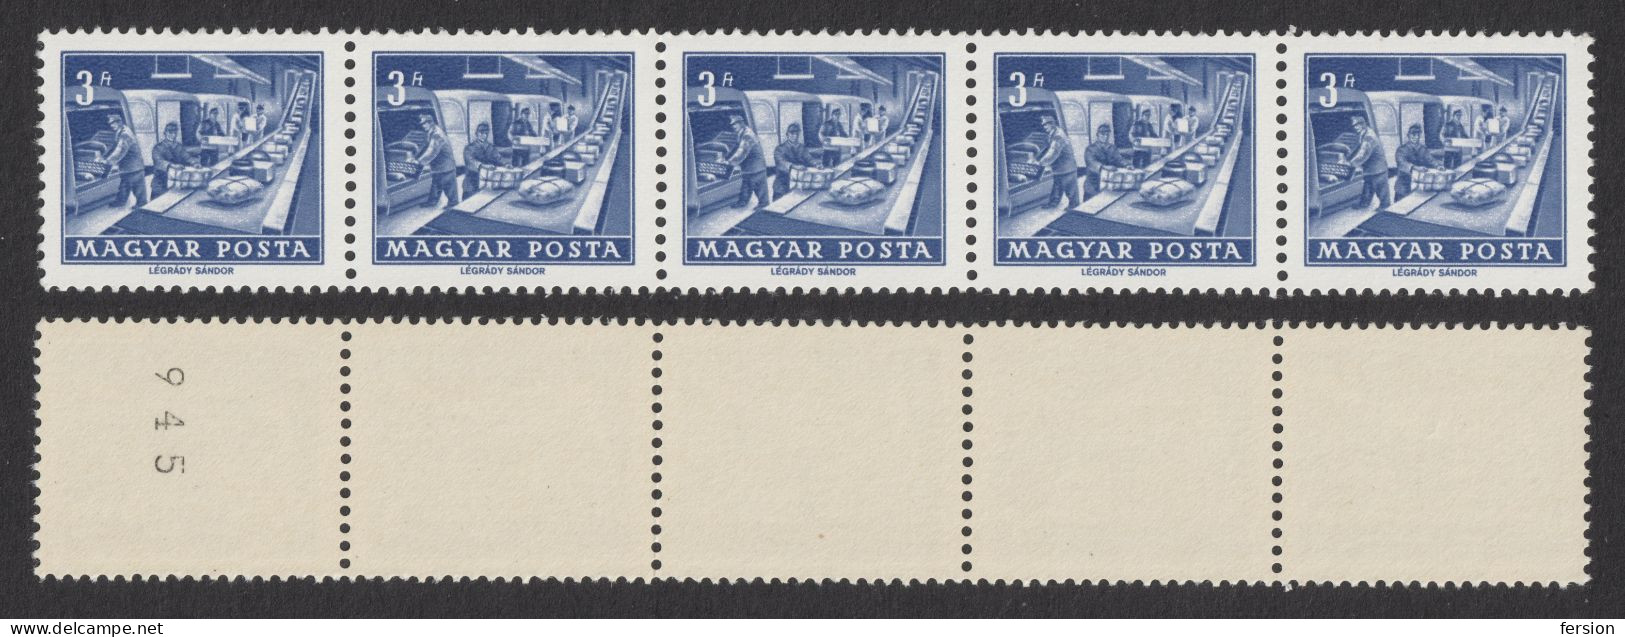 Parcel Post PACKET VAN TRUCK Postman 1963 1972 HUNGARY Roll Coil Automat Automatic Automata STAMP Numbered - Used - Post